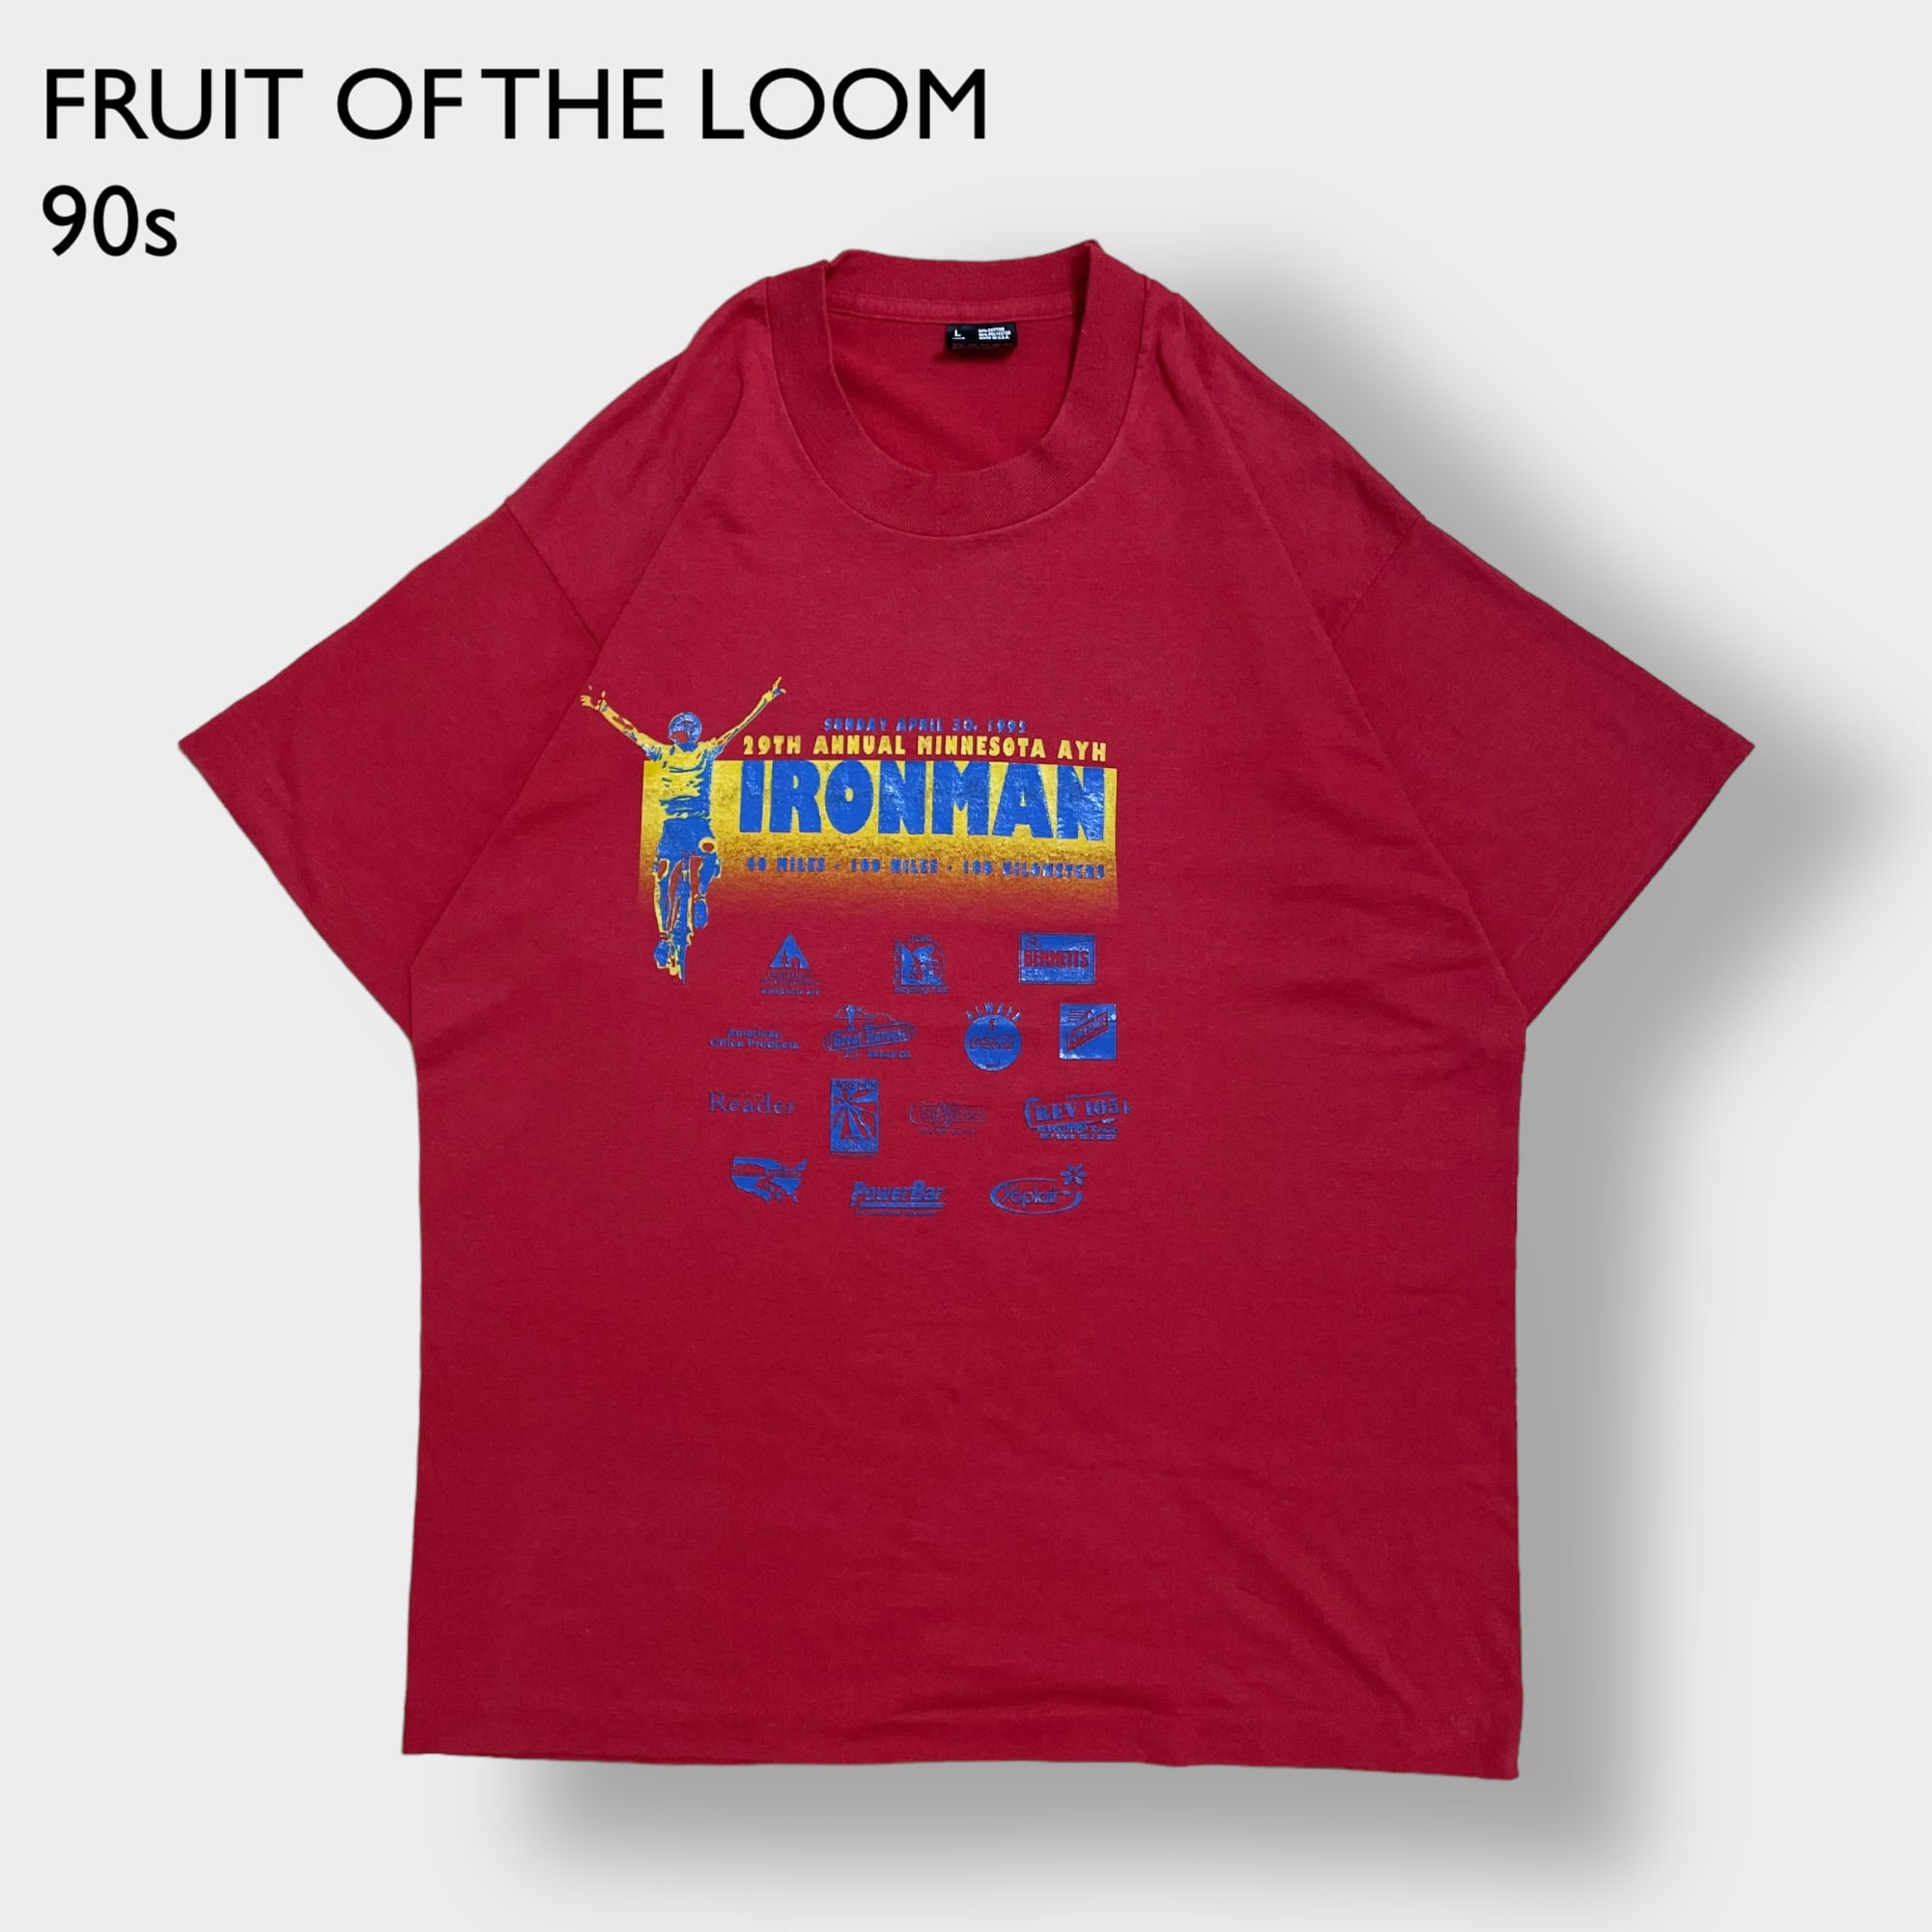 FRUIT OF THE LOOM】90s USA製 Tシャツ シングルステッチ IRONMAN 1995